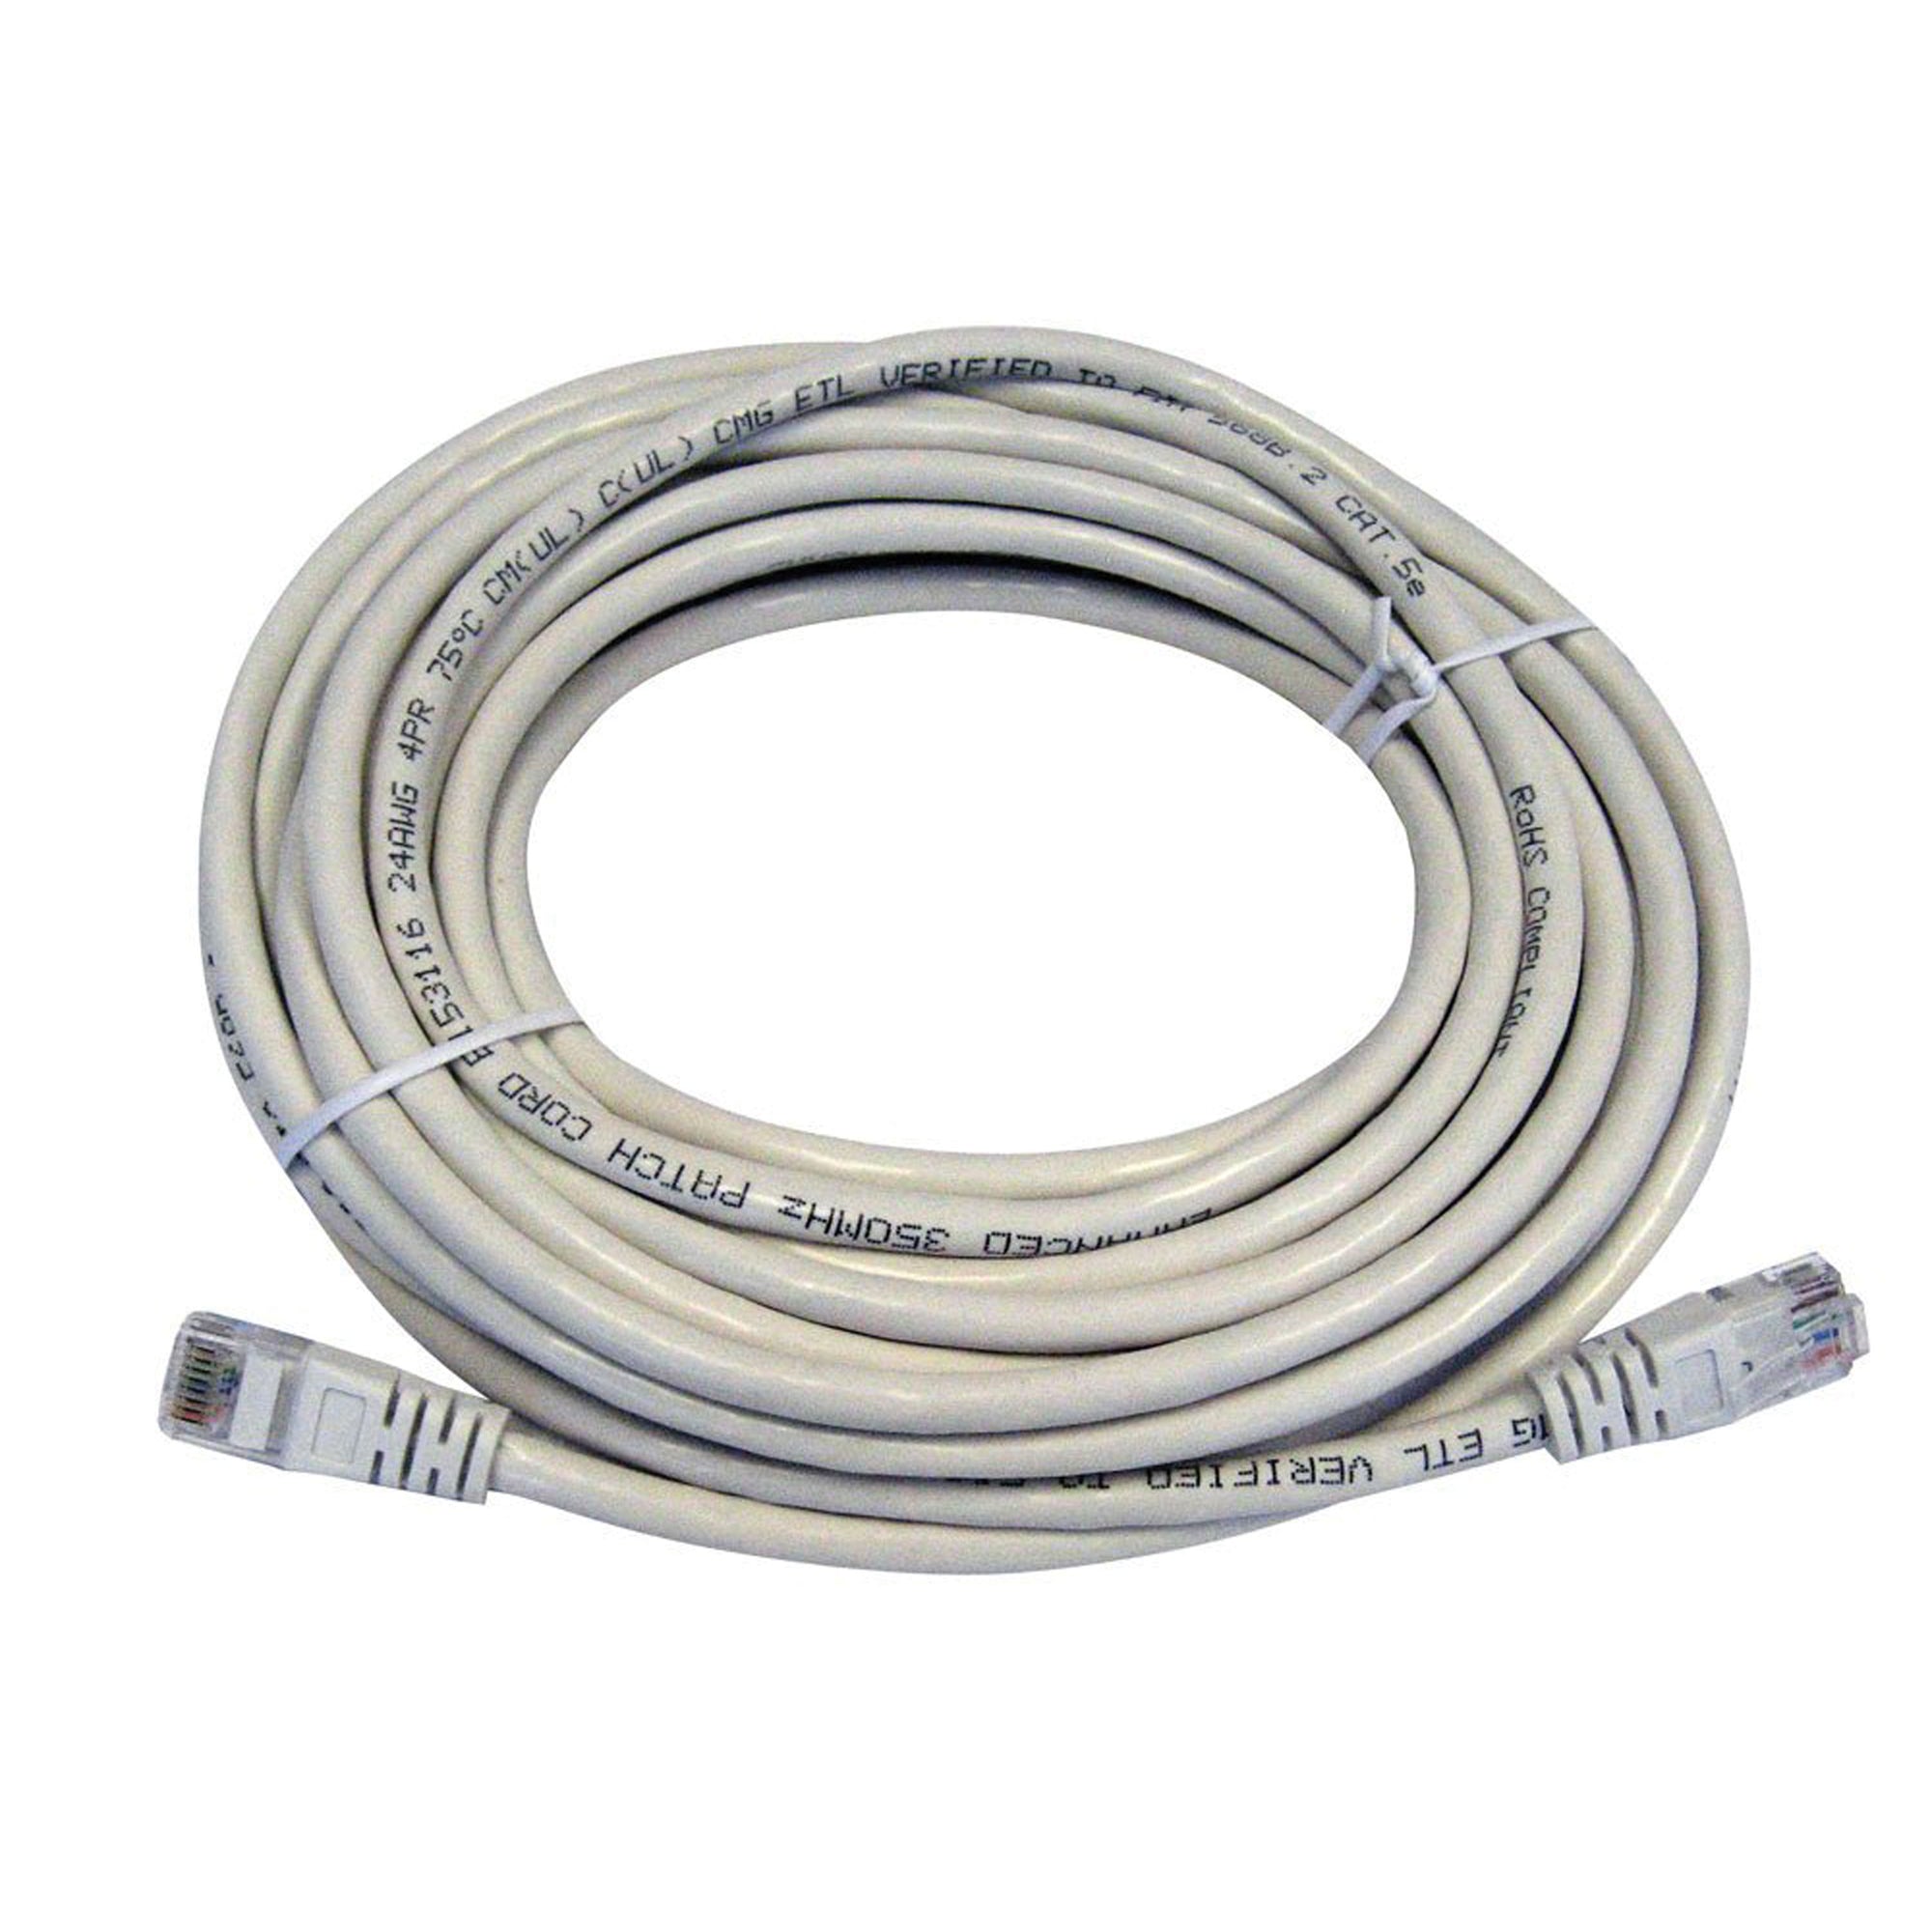 Xantrex 809-0942 Network Cable for FREEDOM SW Control Panel - 75'